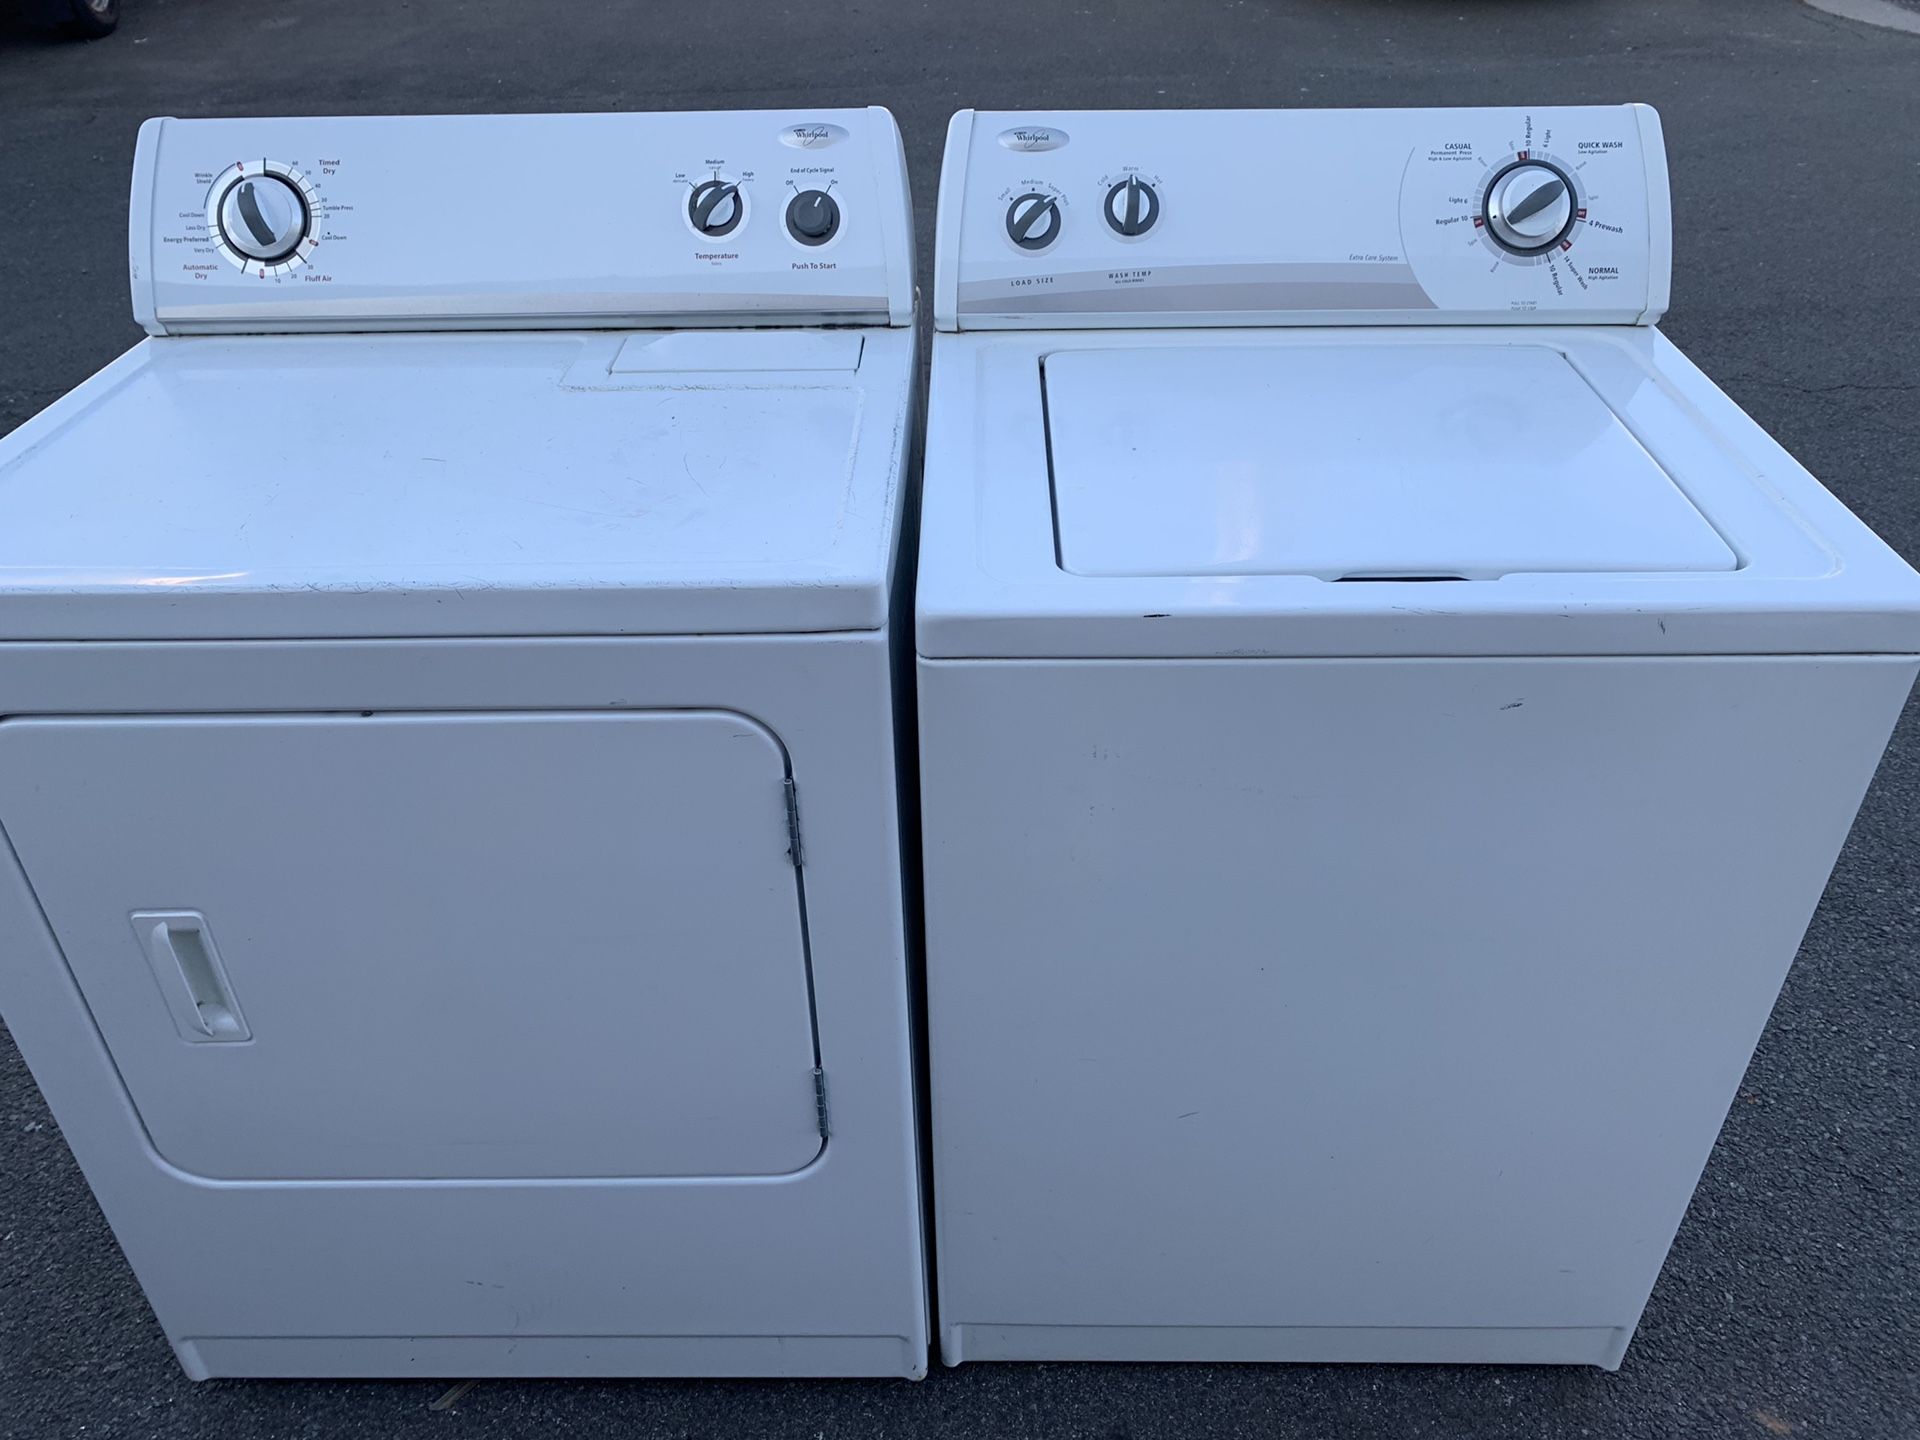 Whirlpool washer and dryer. Working good